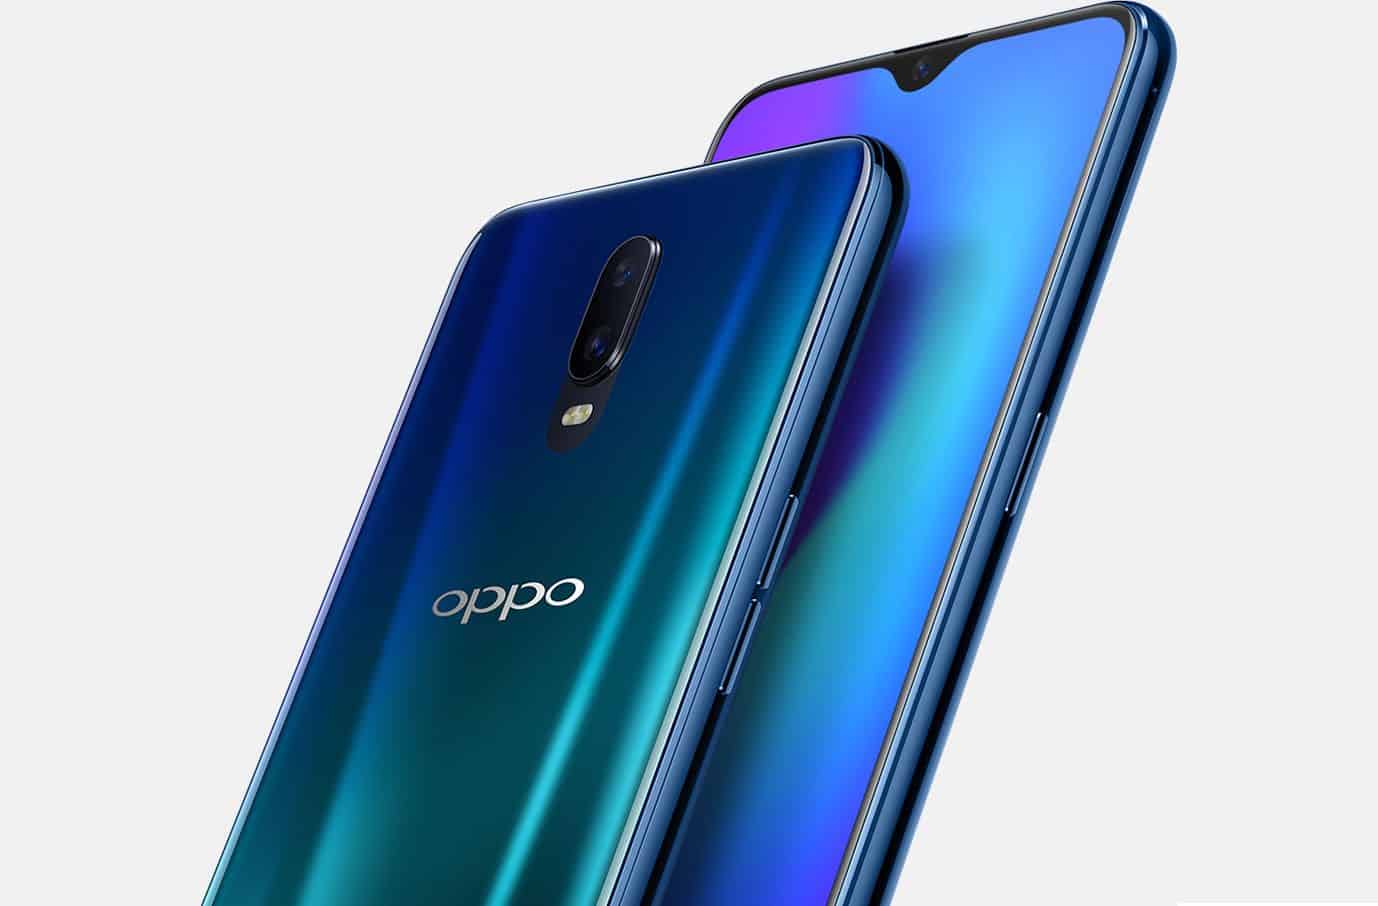 Oppo r17 with waterdrop show is now open for registration on jd.com